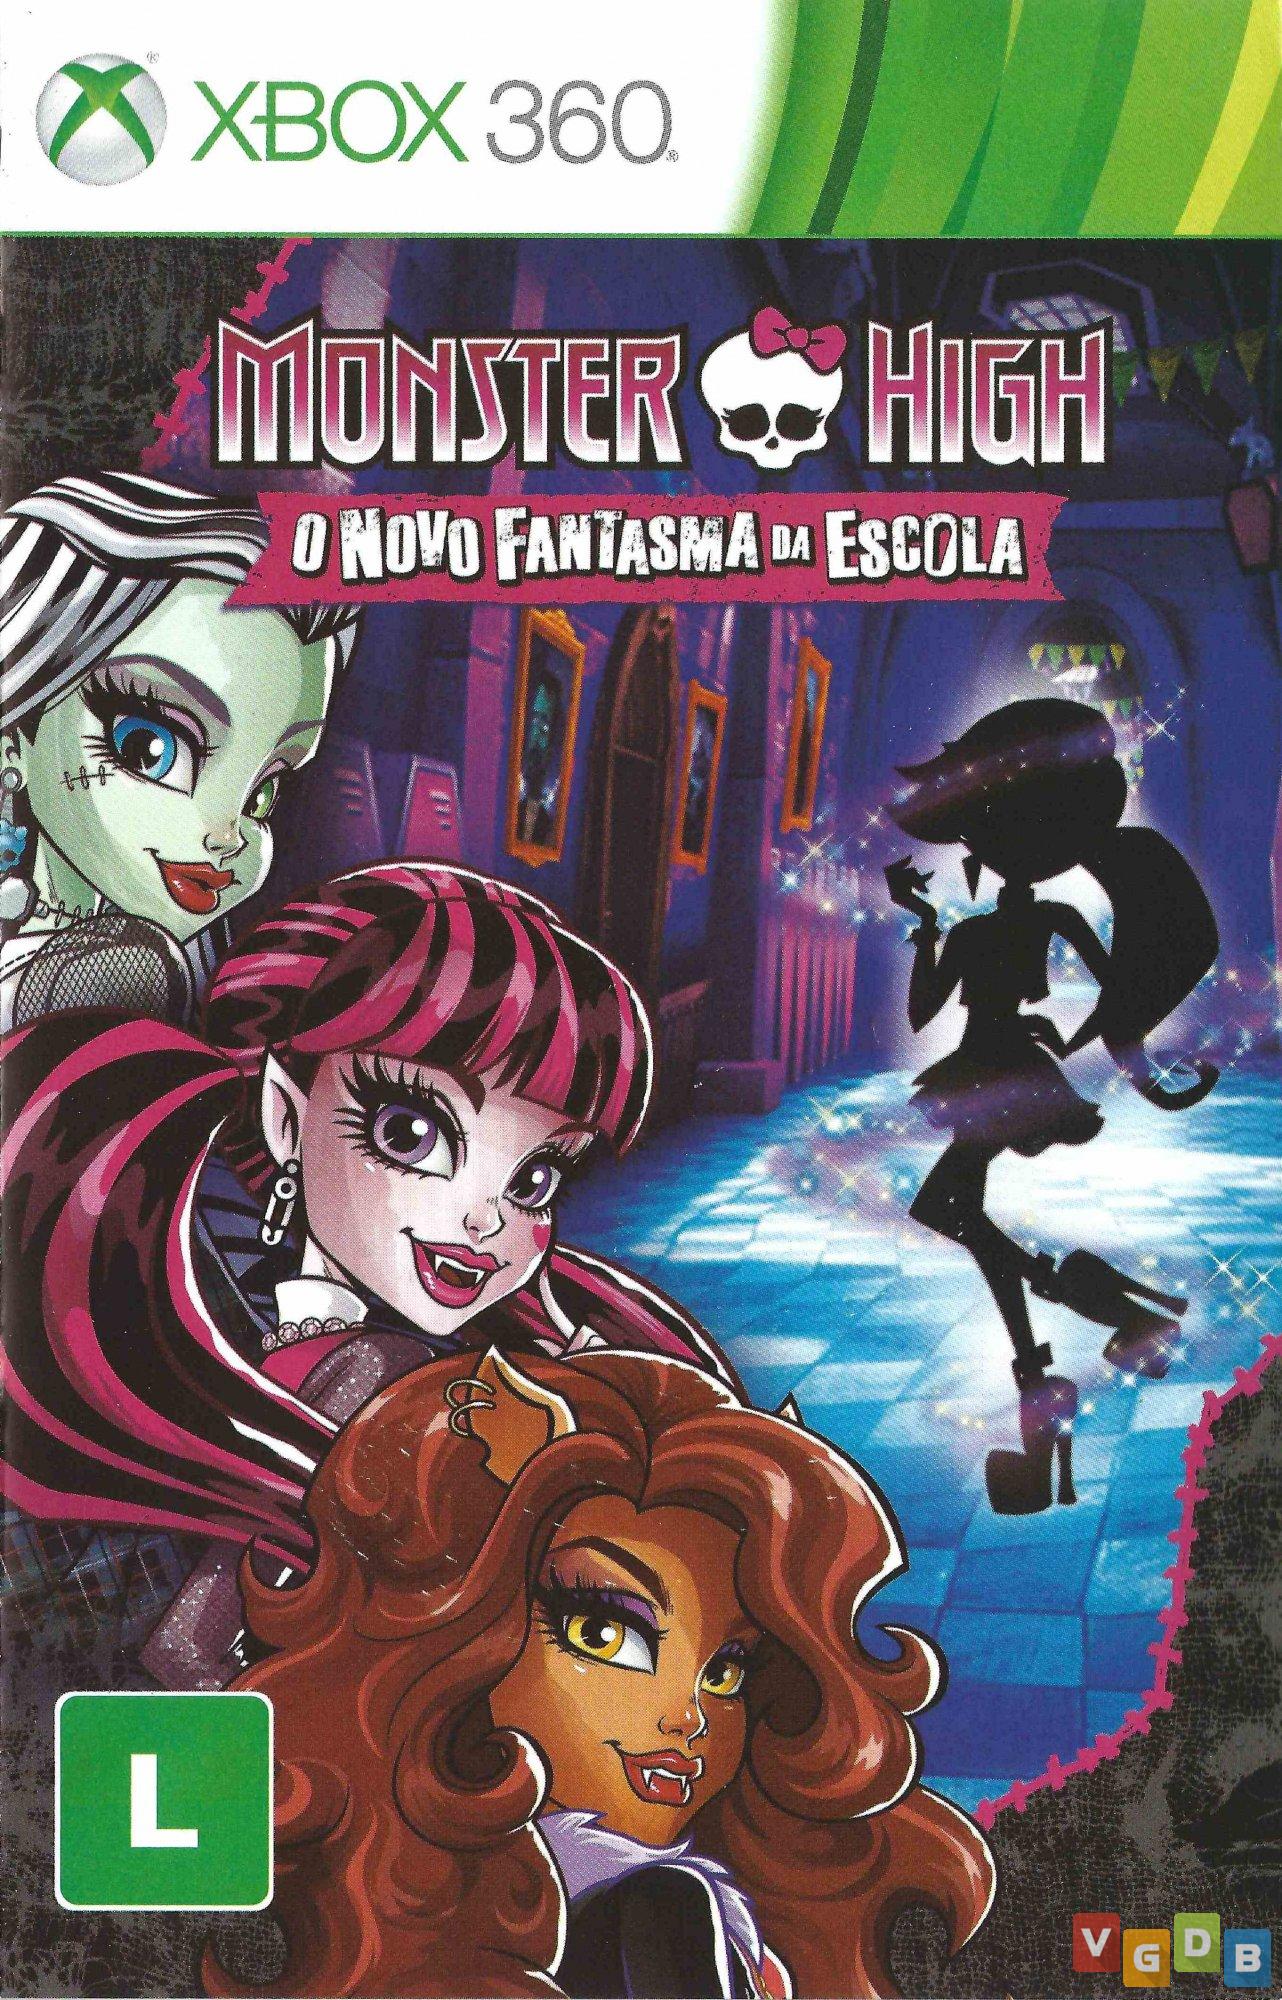 Monster High: New Ghoul in School - VGDB - Vídeo Game Data Base